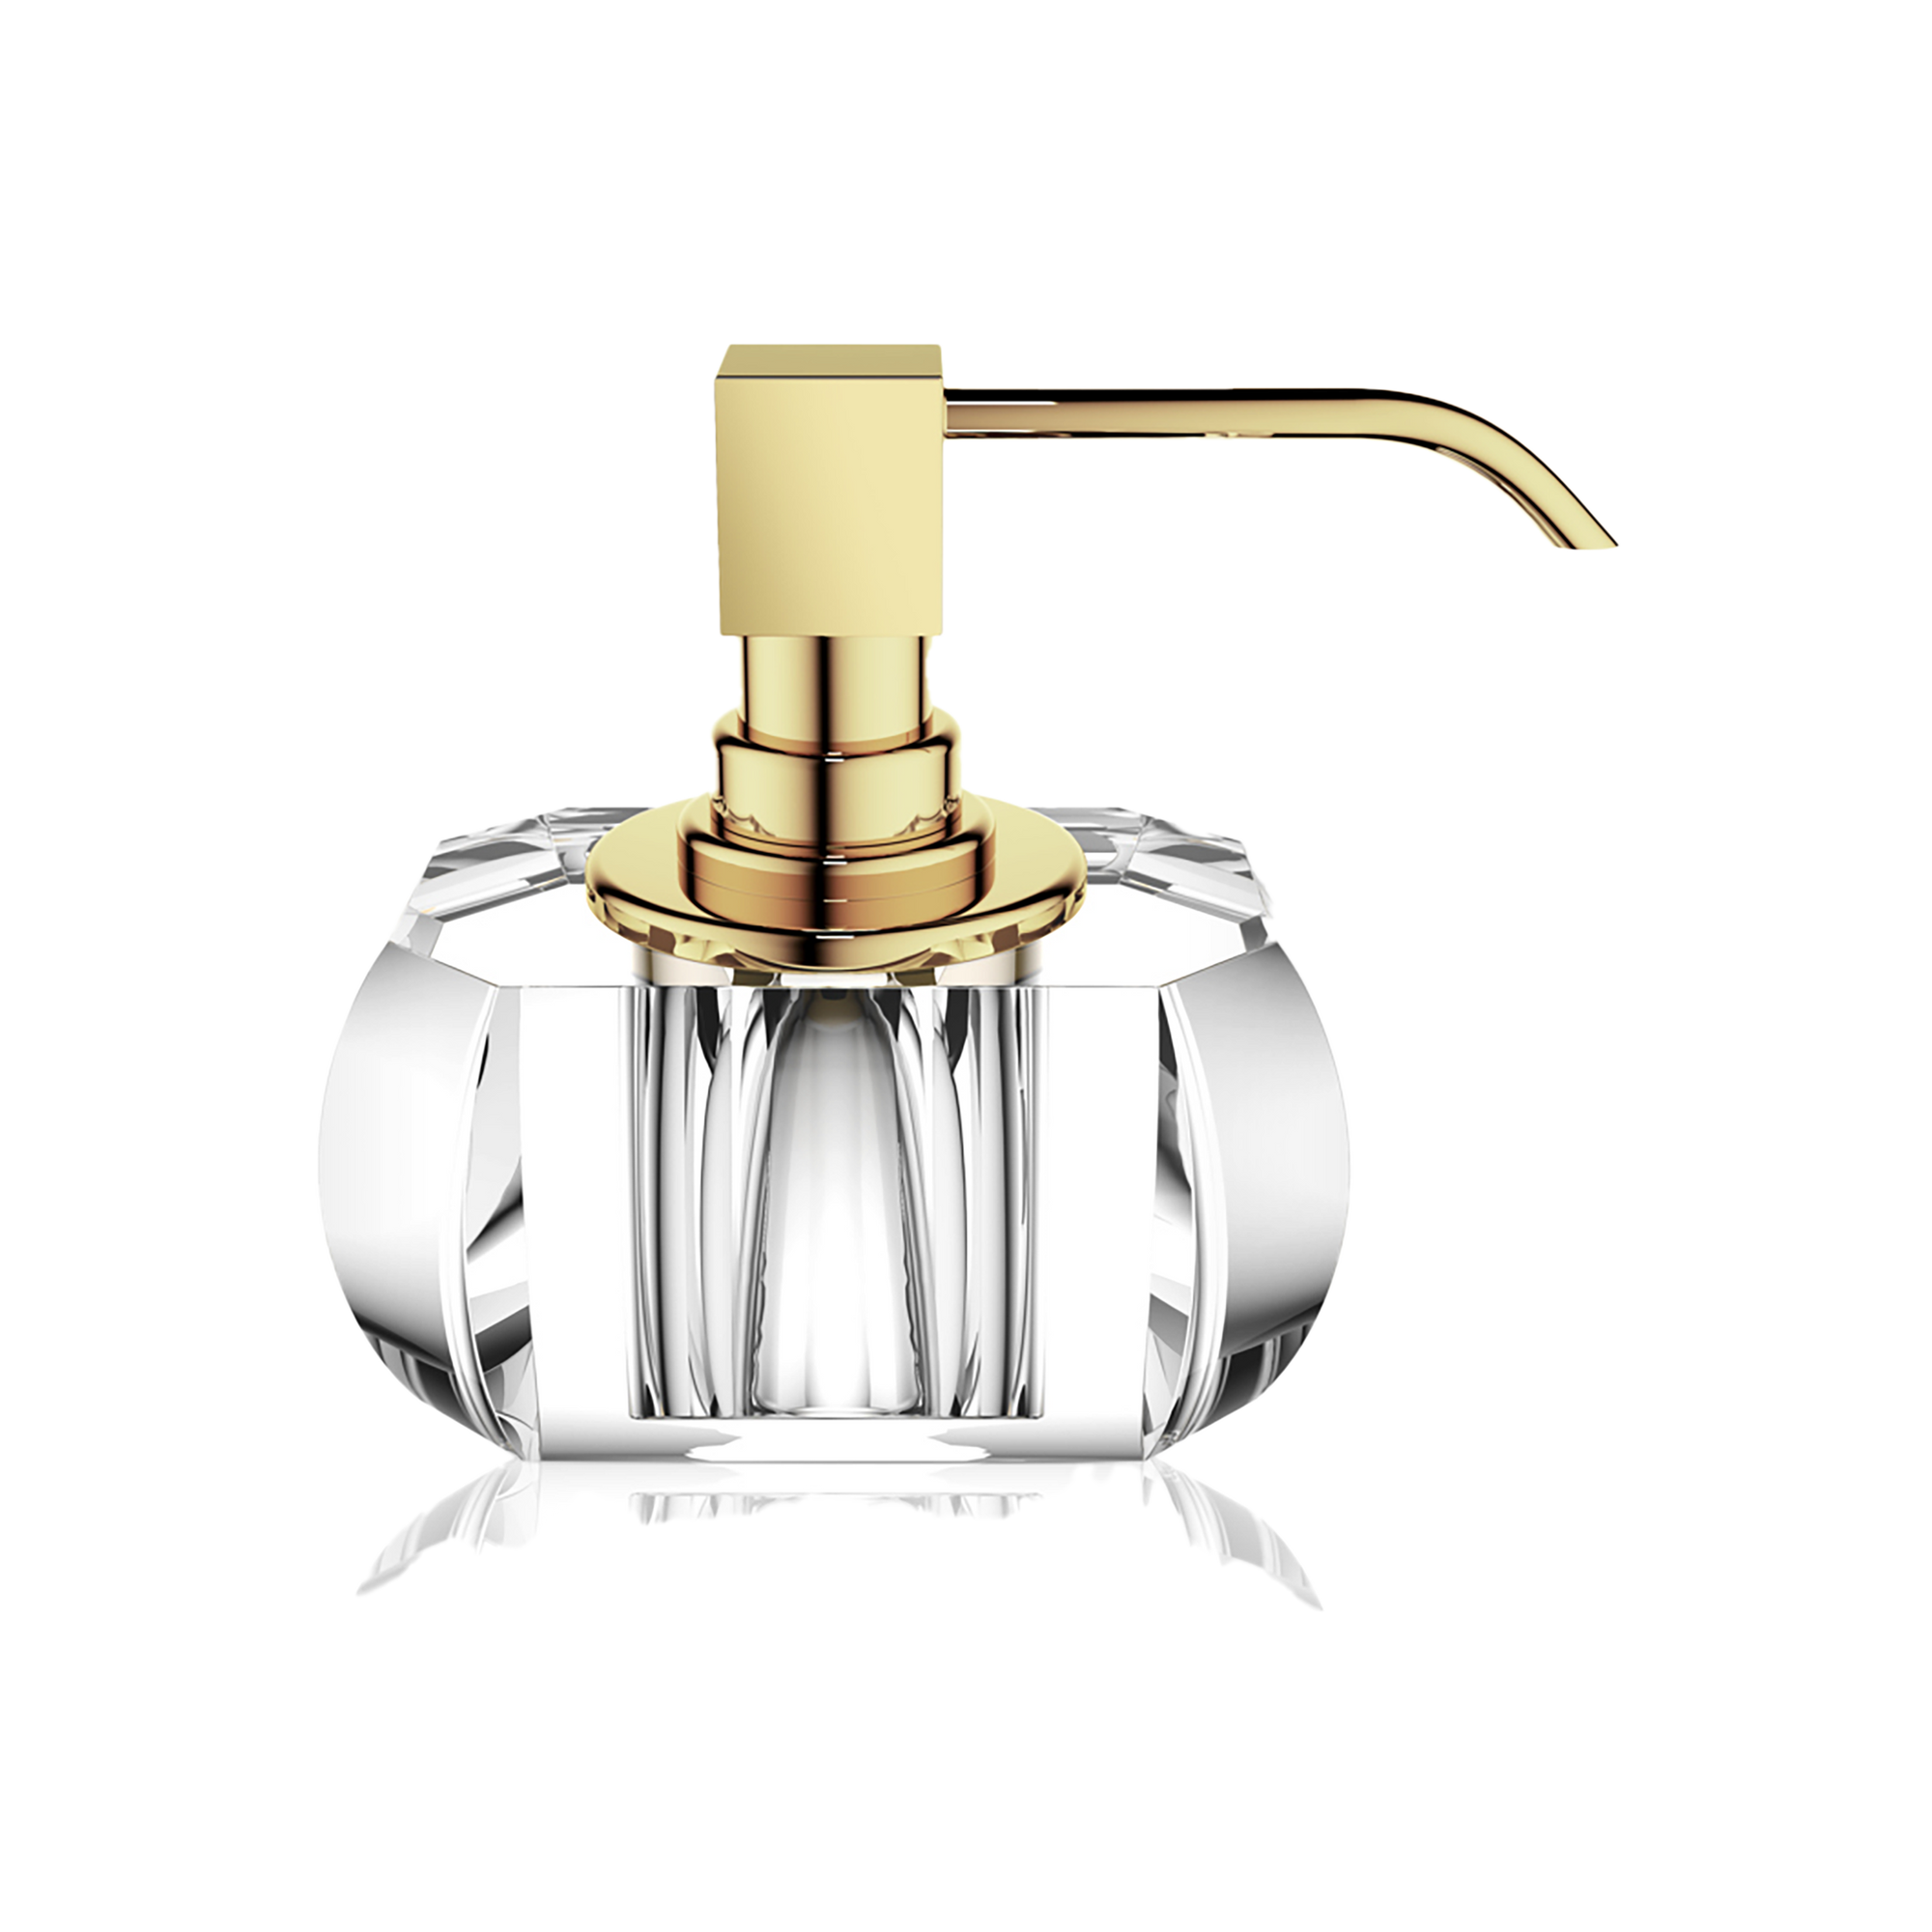 Dazzle with the Kristall soap dispenser, featuring a beveled crystal jar adorned with a chrome pump.